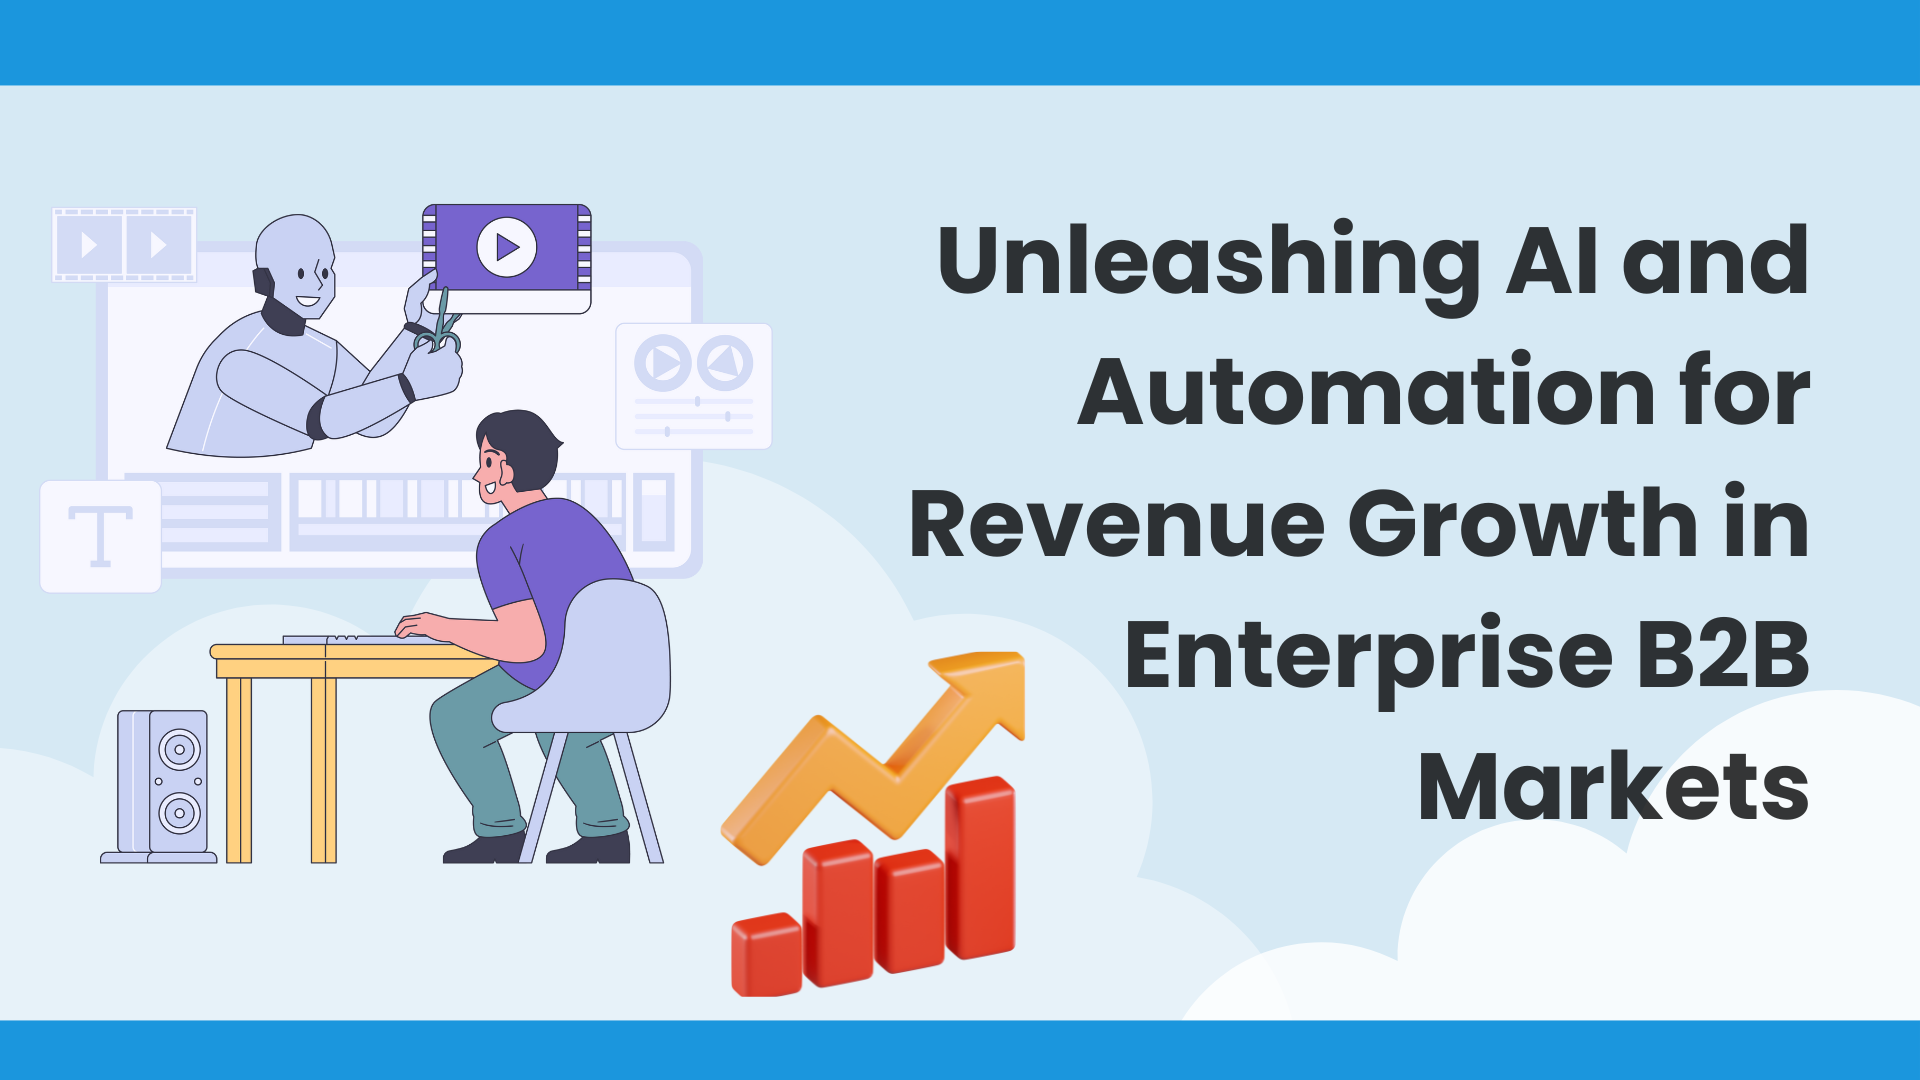 Unleashing AI and Automation for Revenue Growth in Enterprise B2B Markets